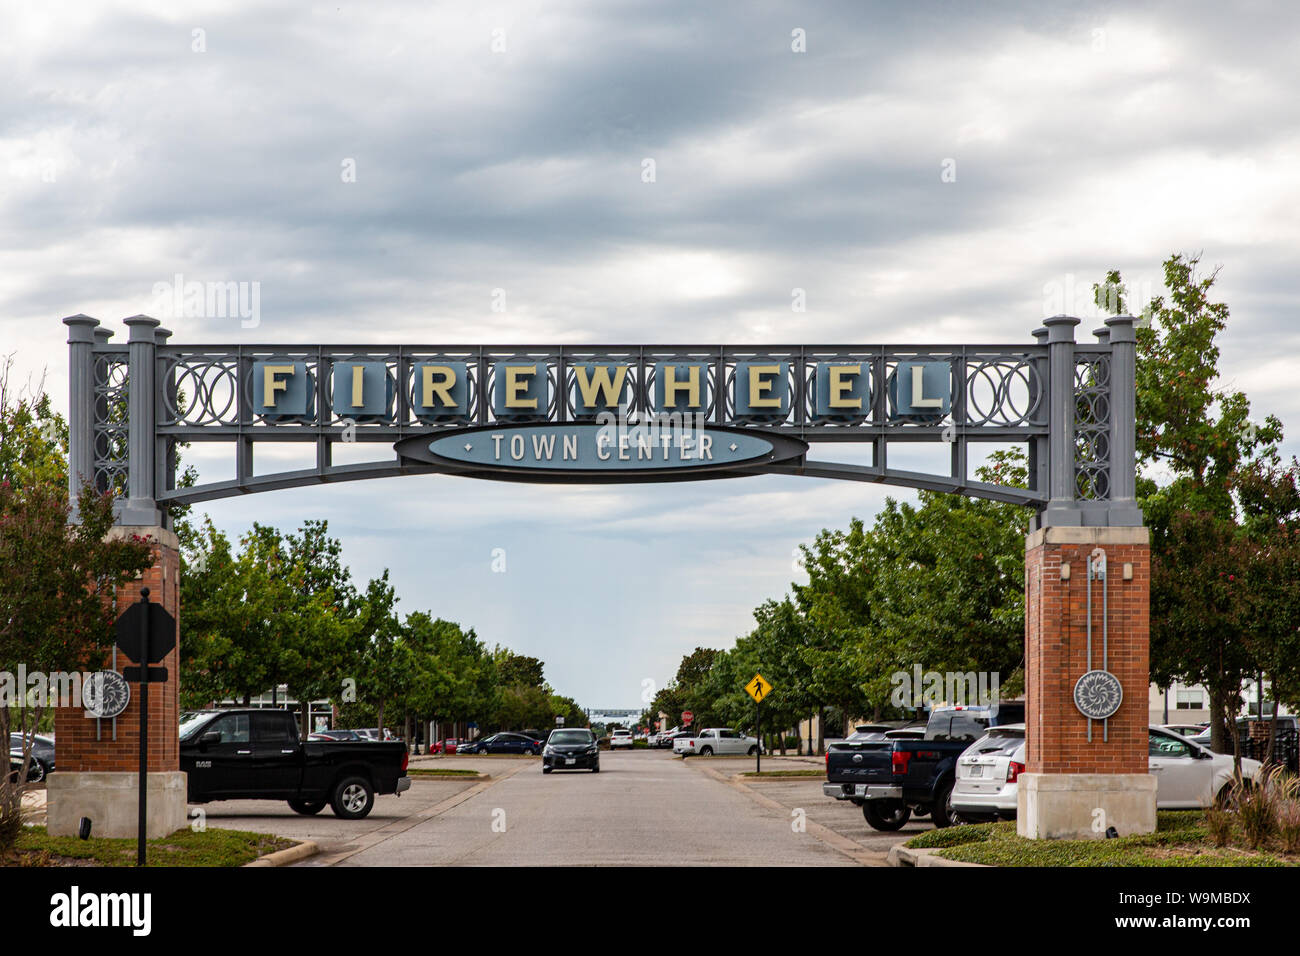 West entrance to Firewheel Town Center in Garland Tx Stock Photo